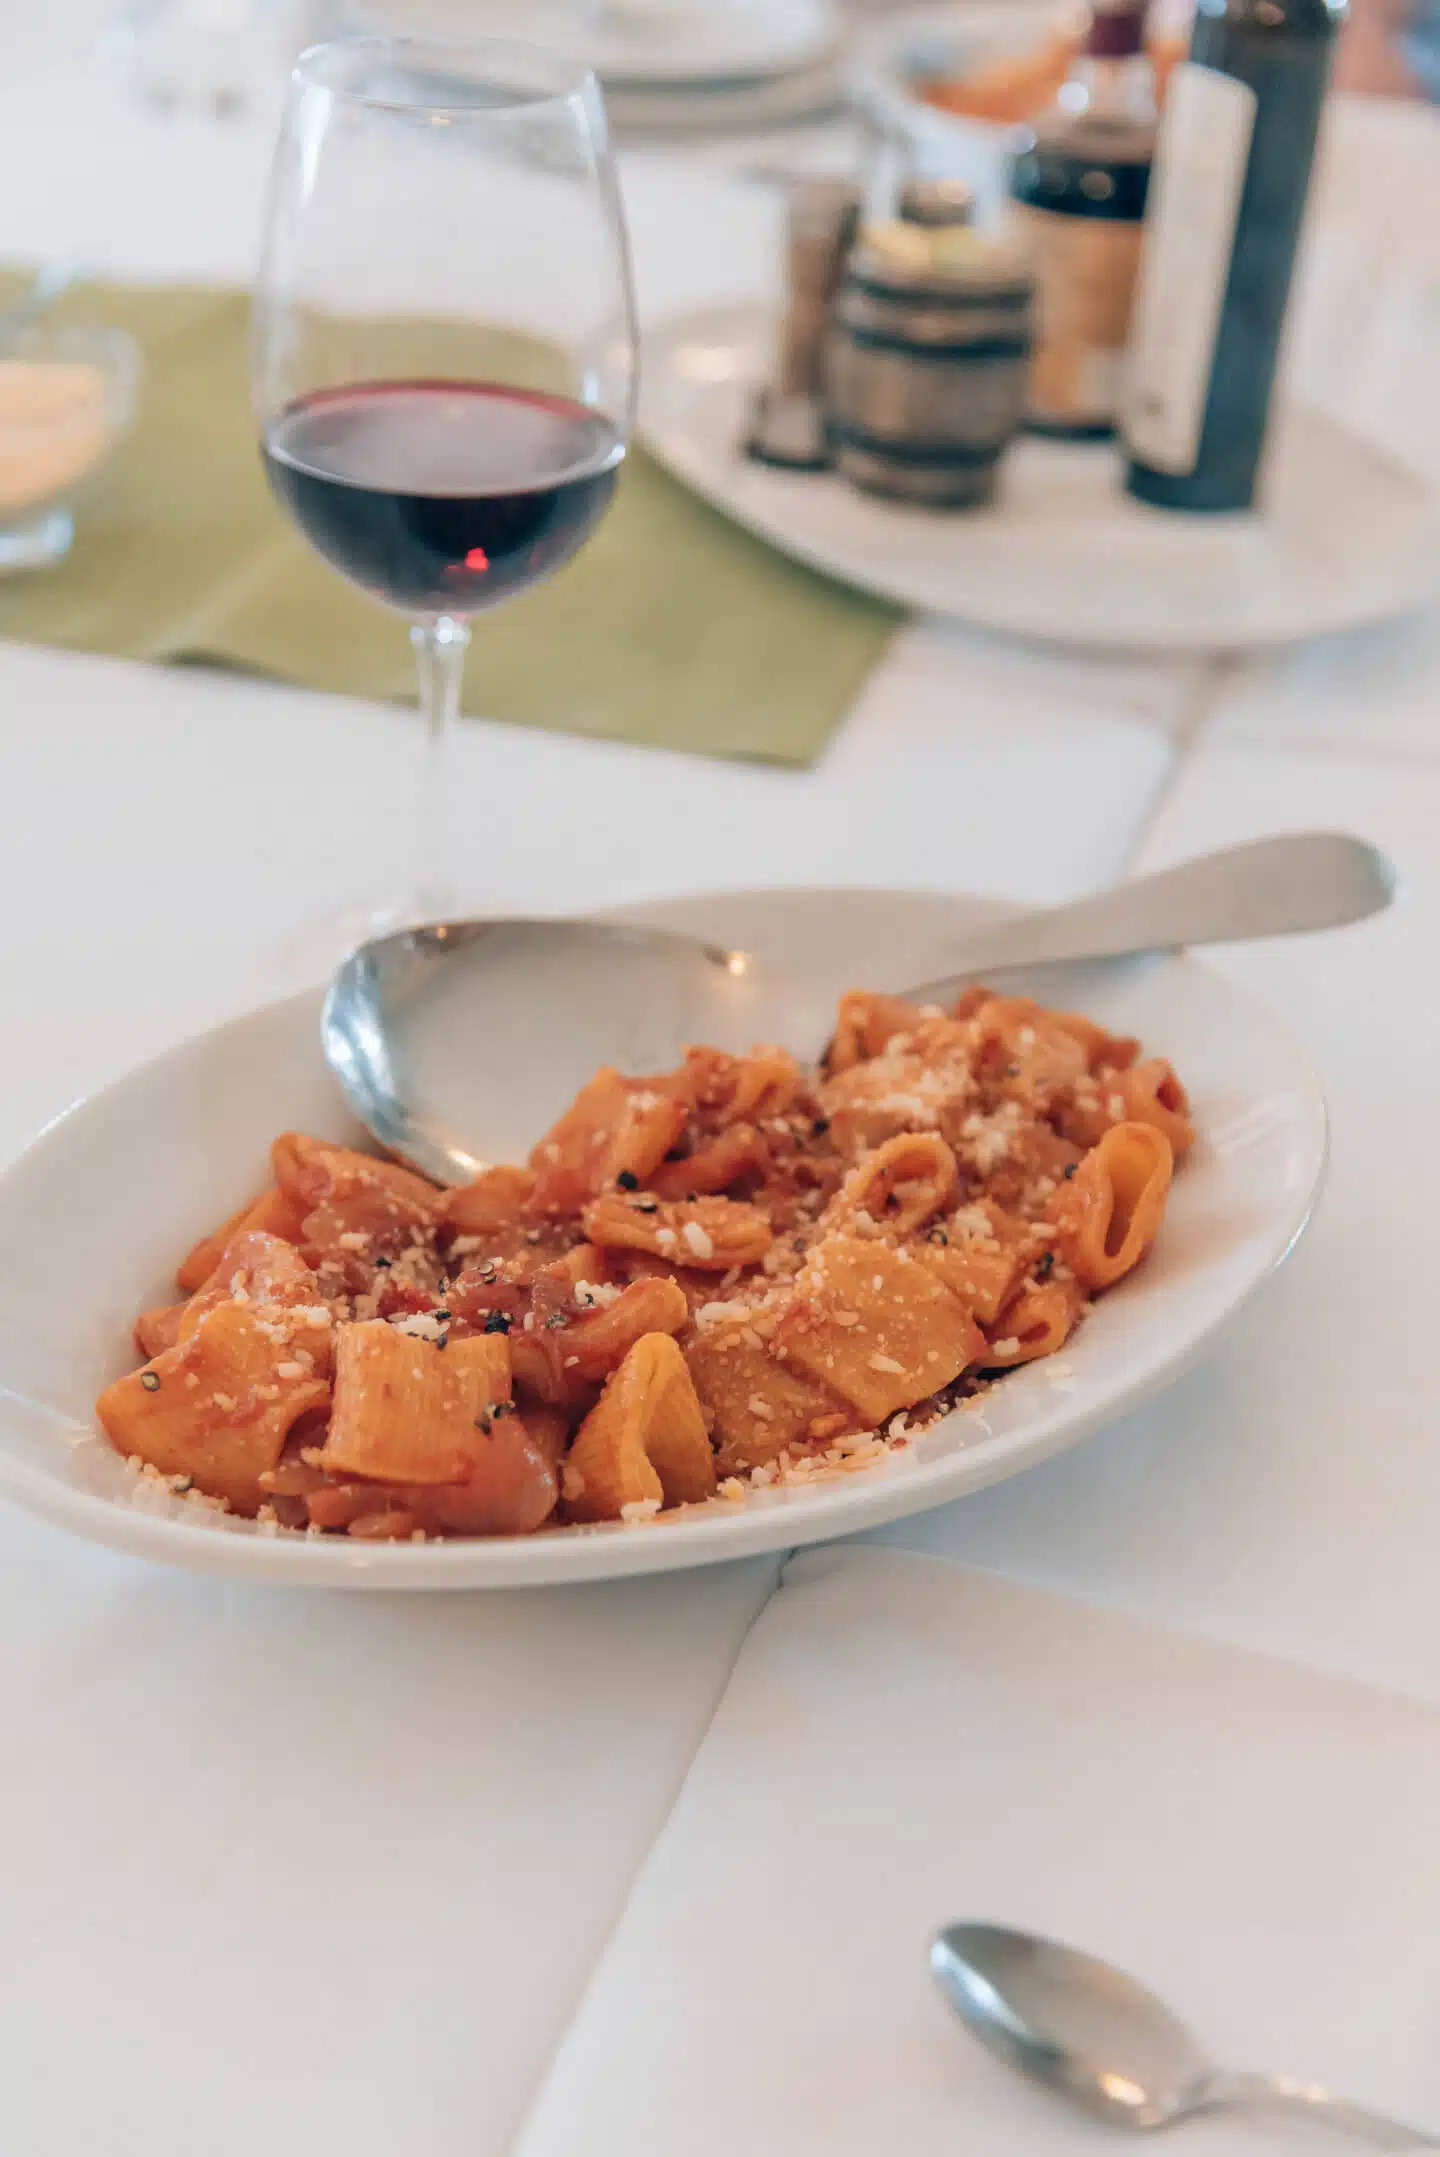 best pasta in Bologna, by travel blogger What The Fab